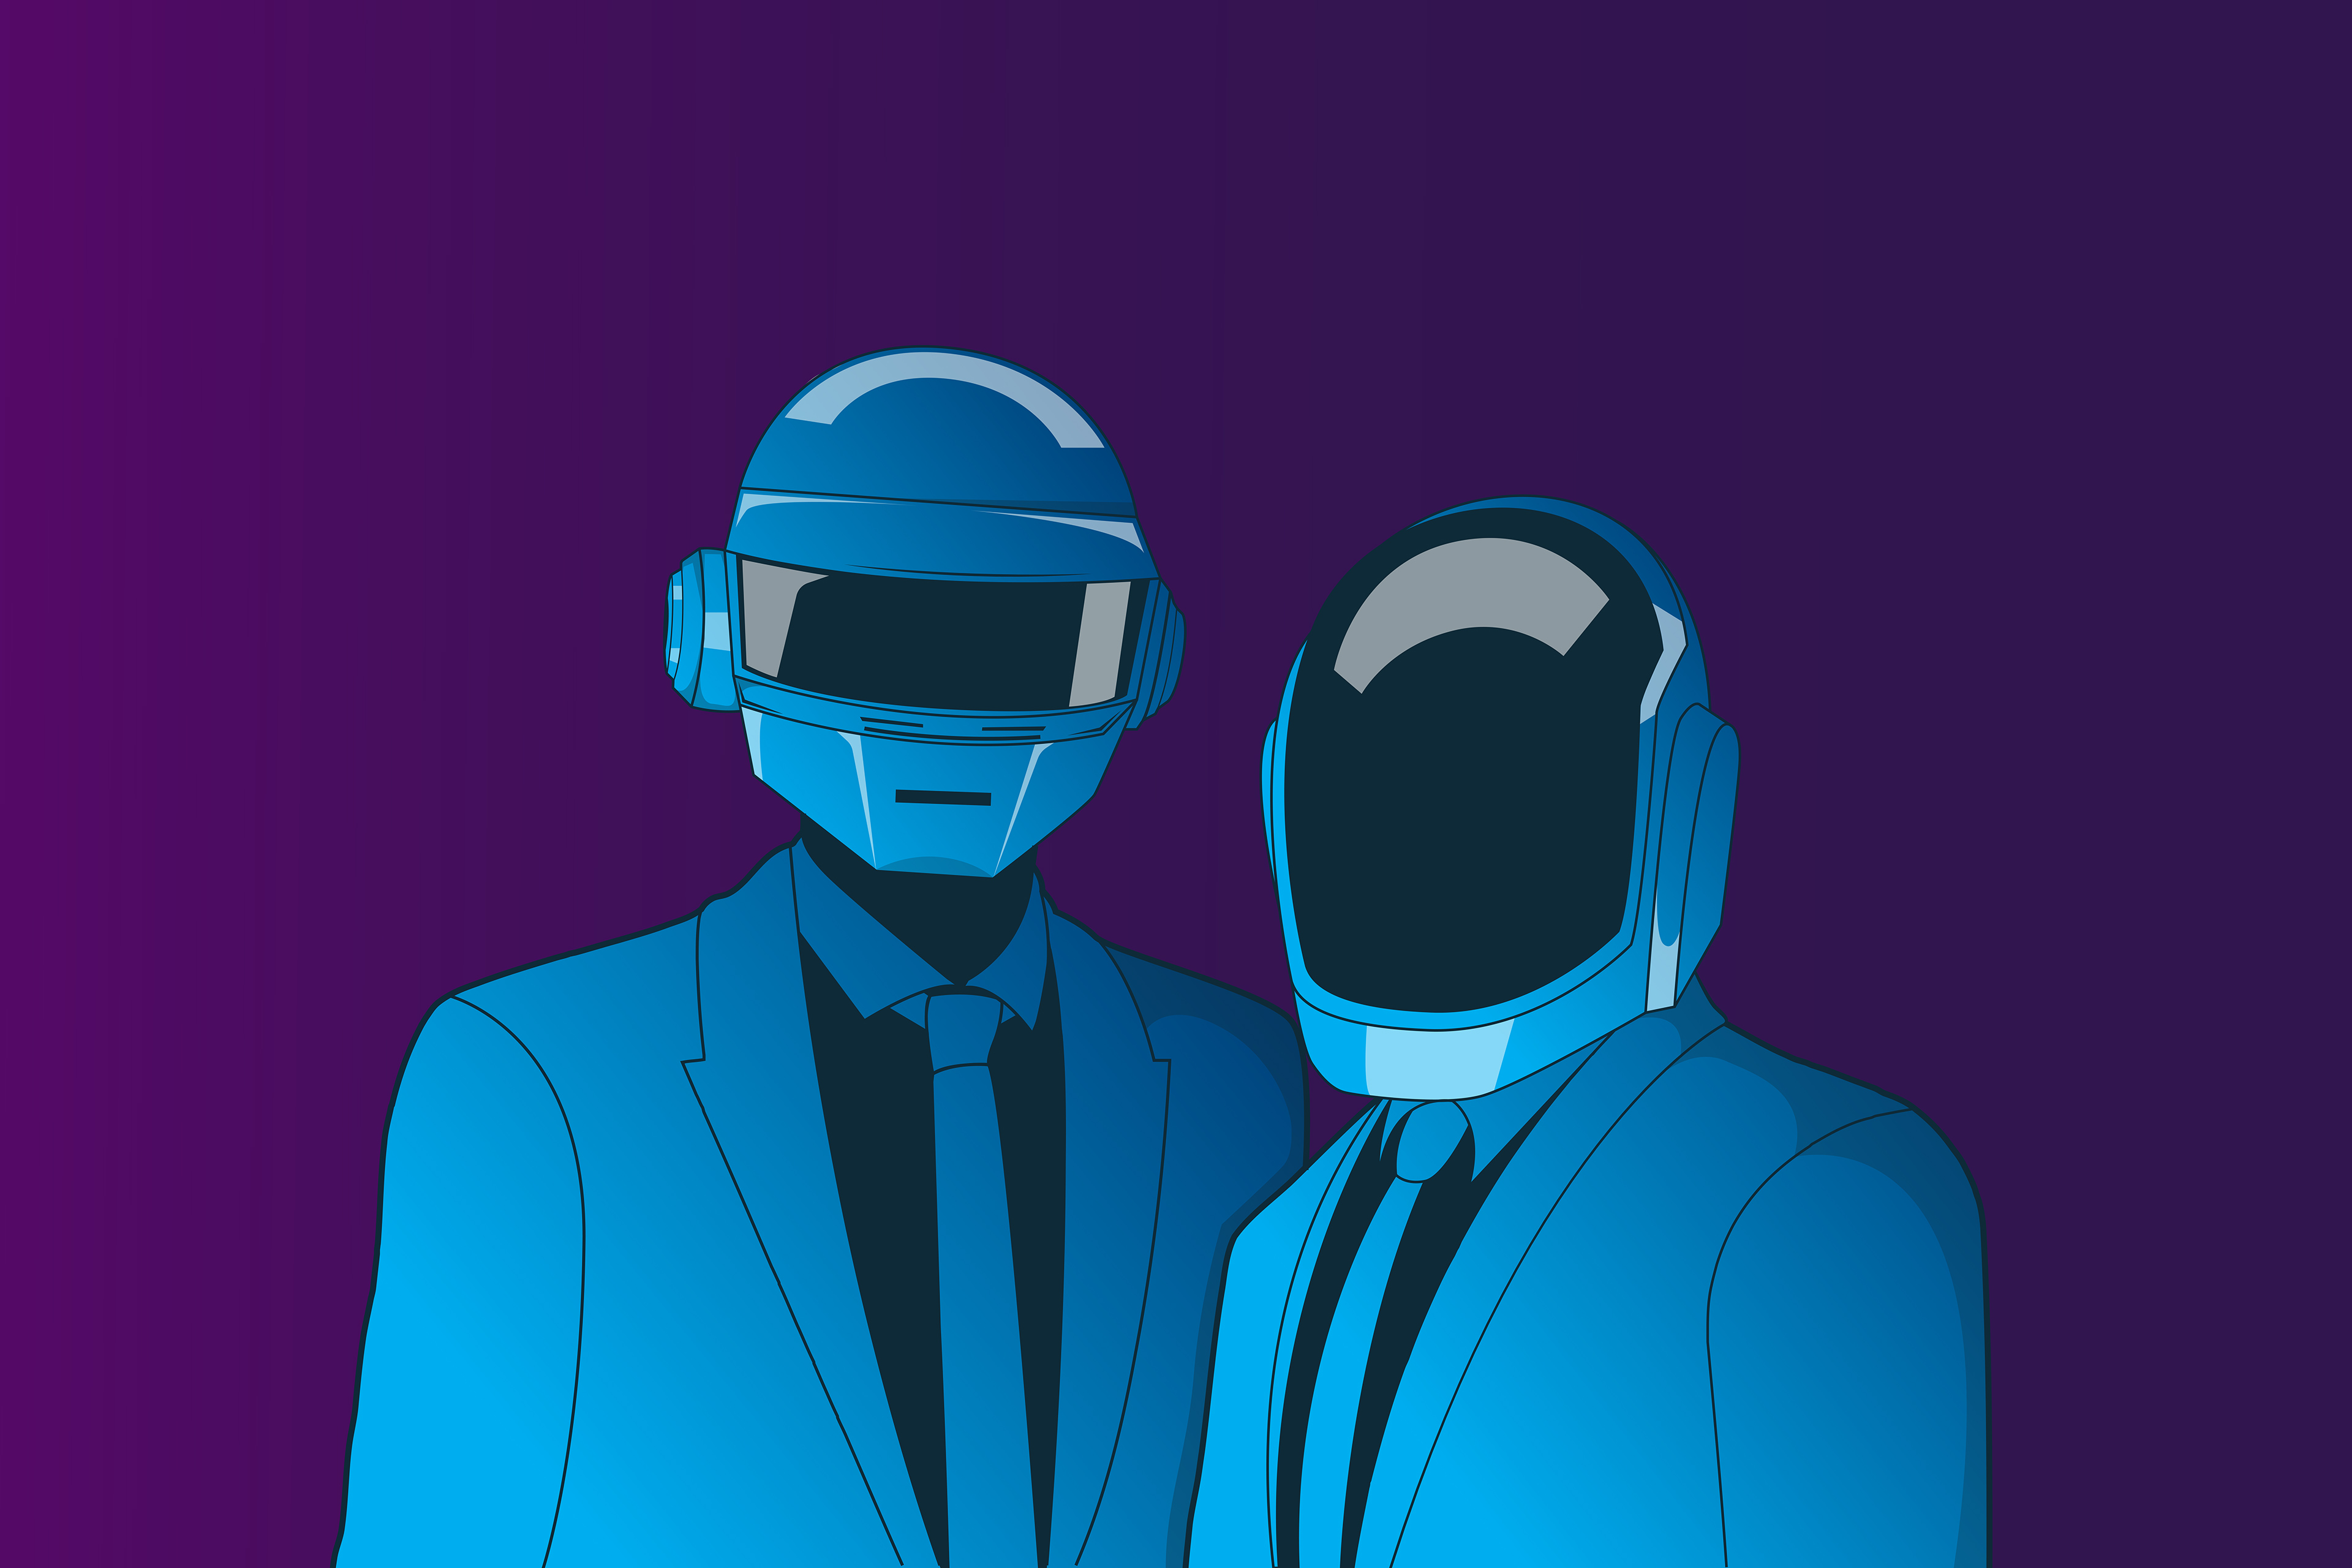 Daft Punk Art 4k Hd Music 4k Wallpapers Images Backgrounds Photos And Pictures